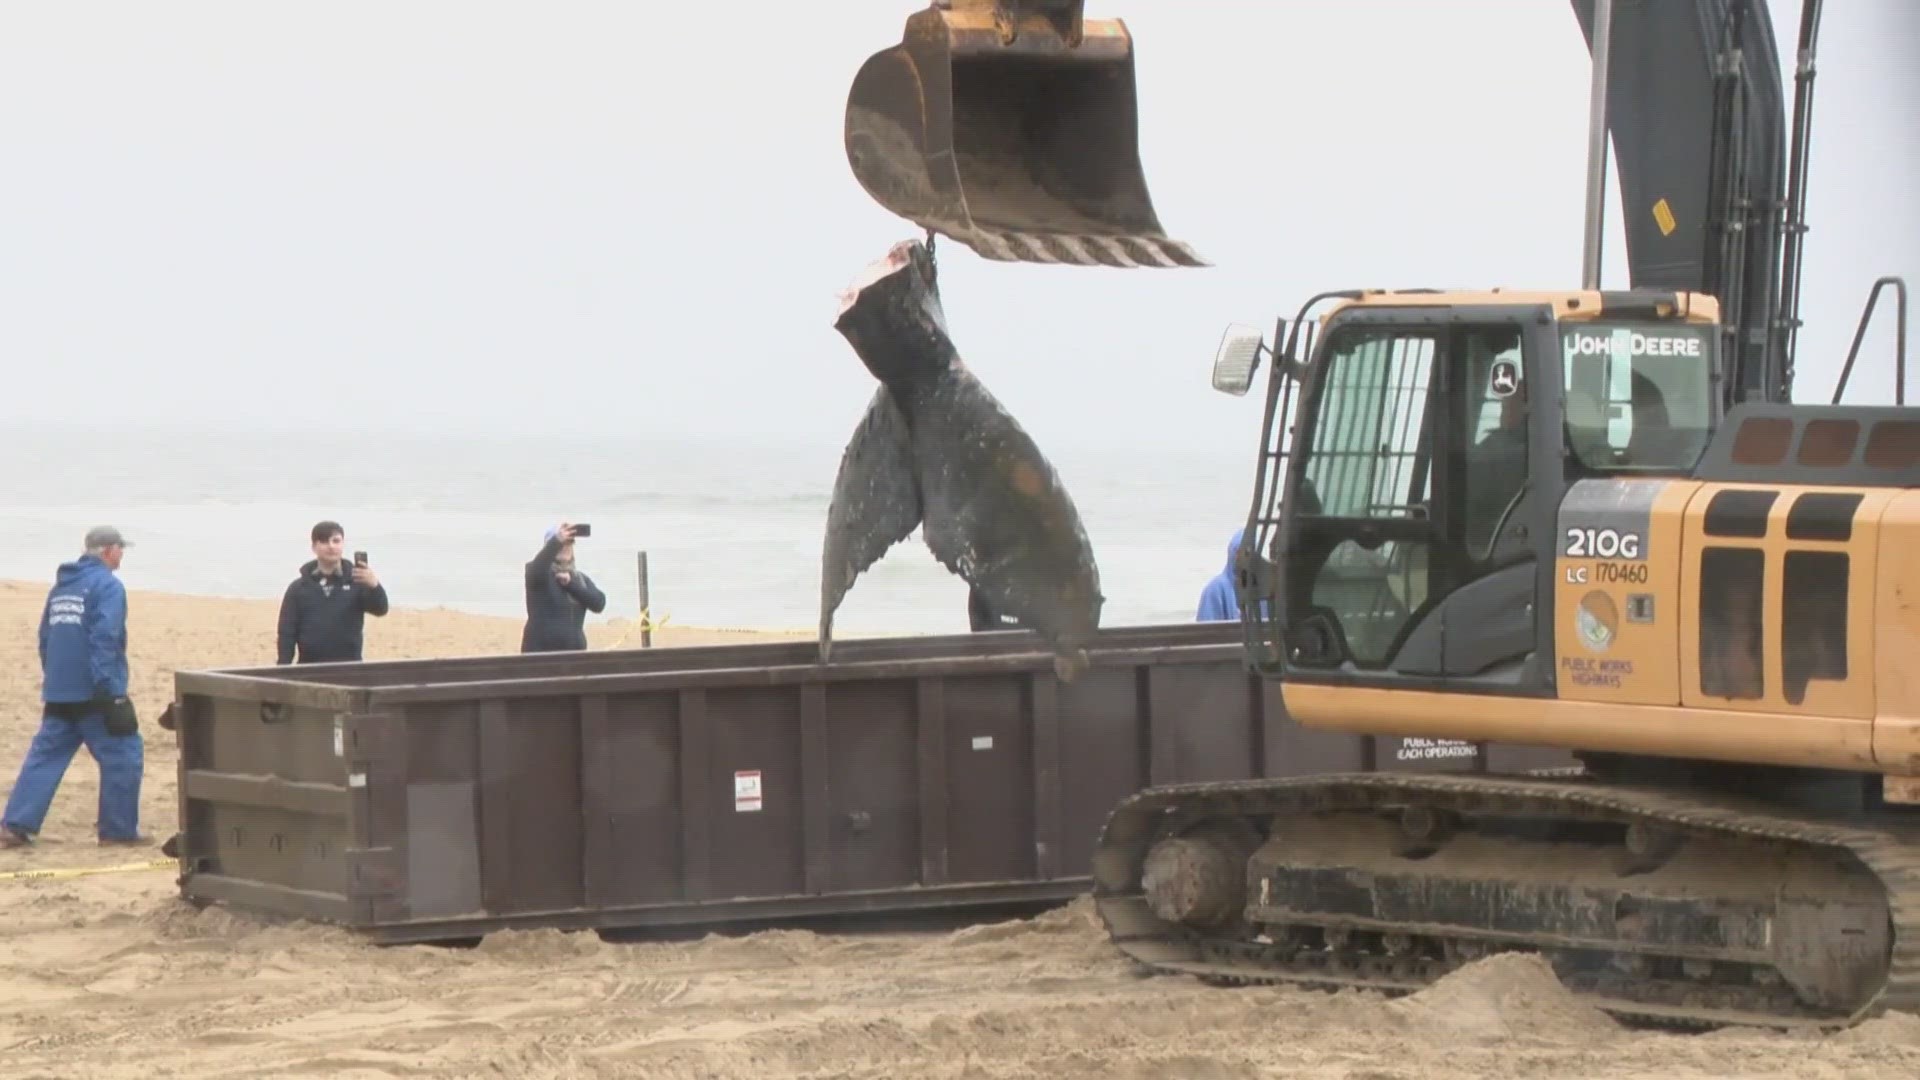 Marine experts are investigating after two dead whales were found in Virginia Beach in less than 24 hours